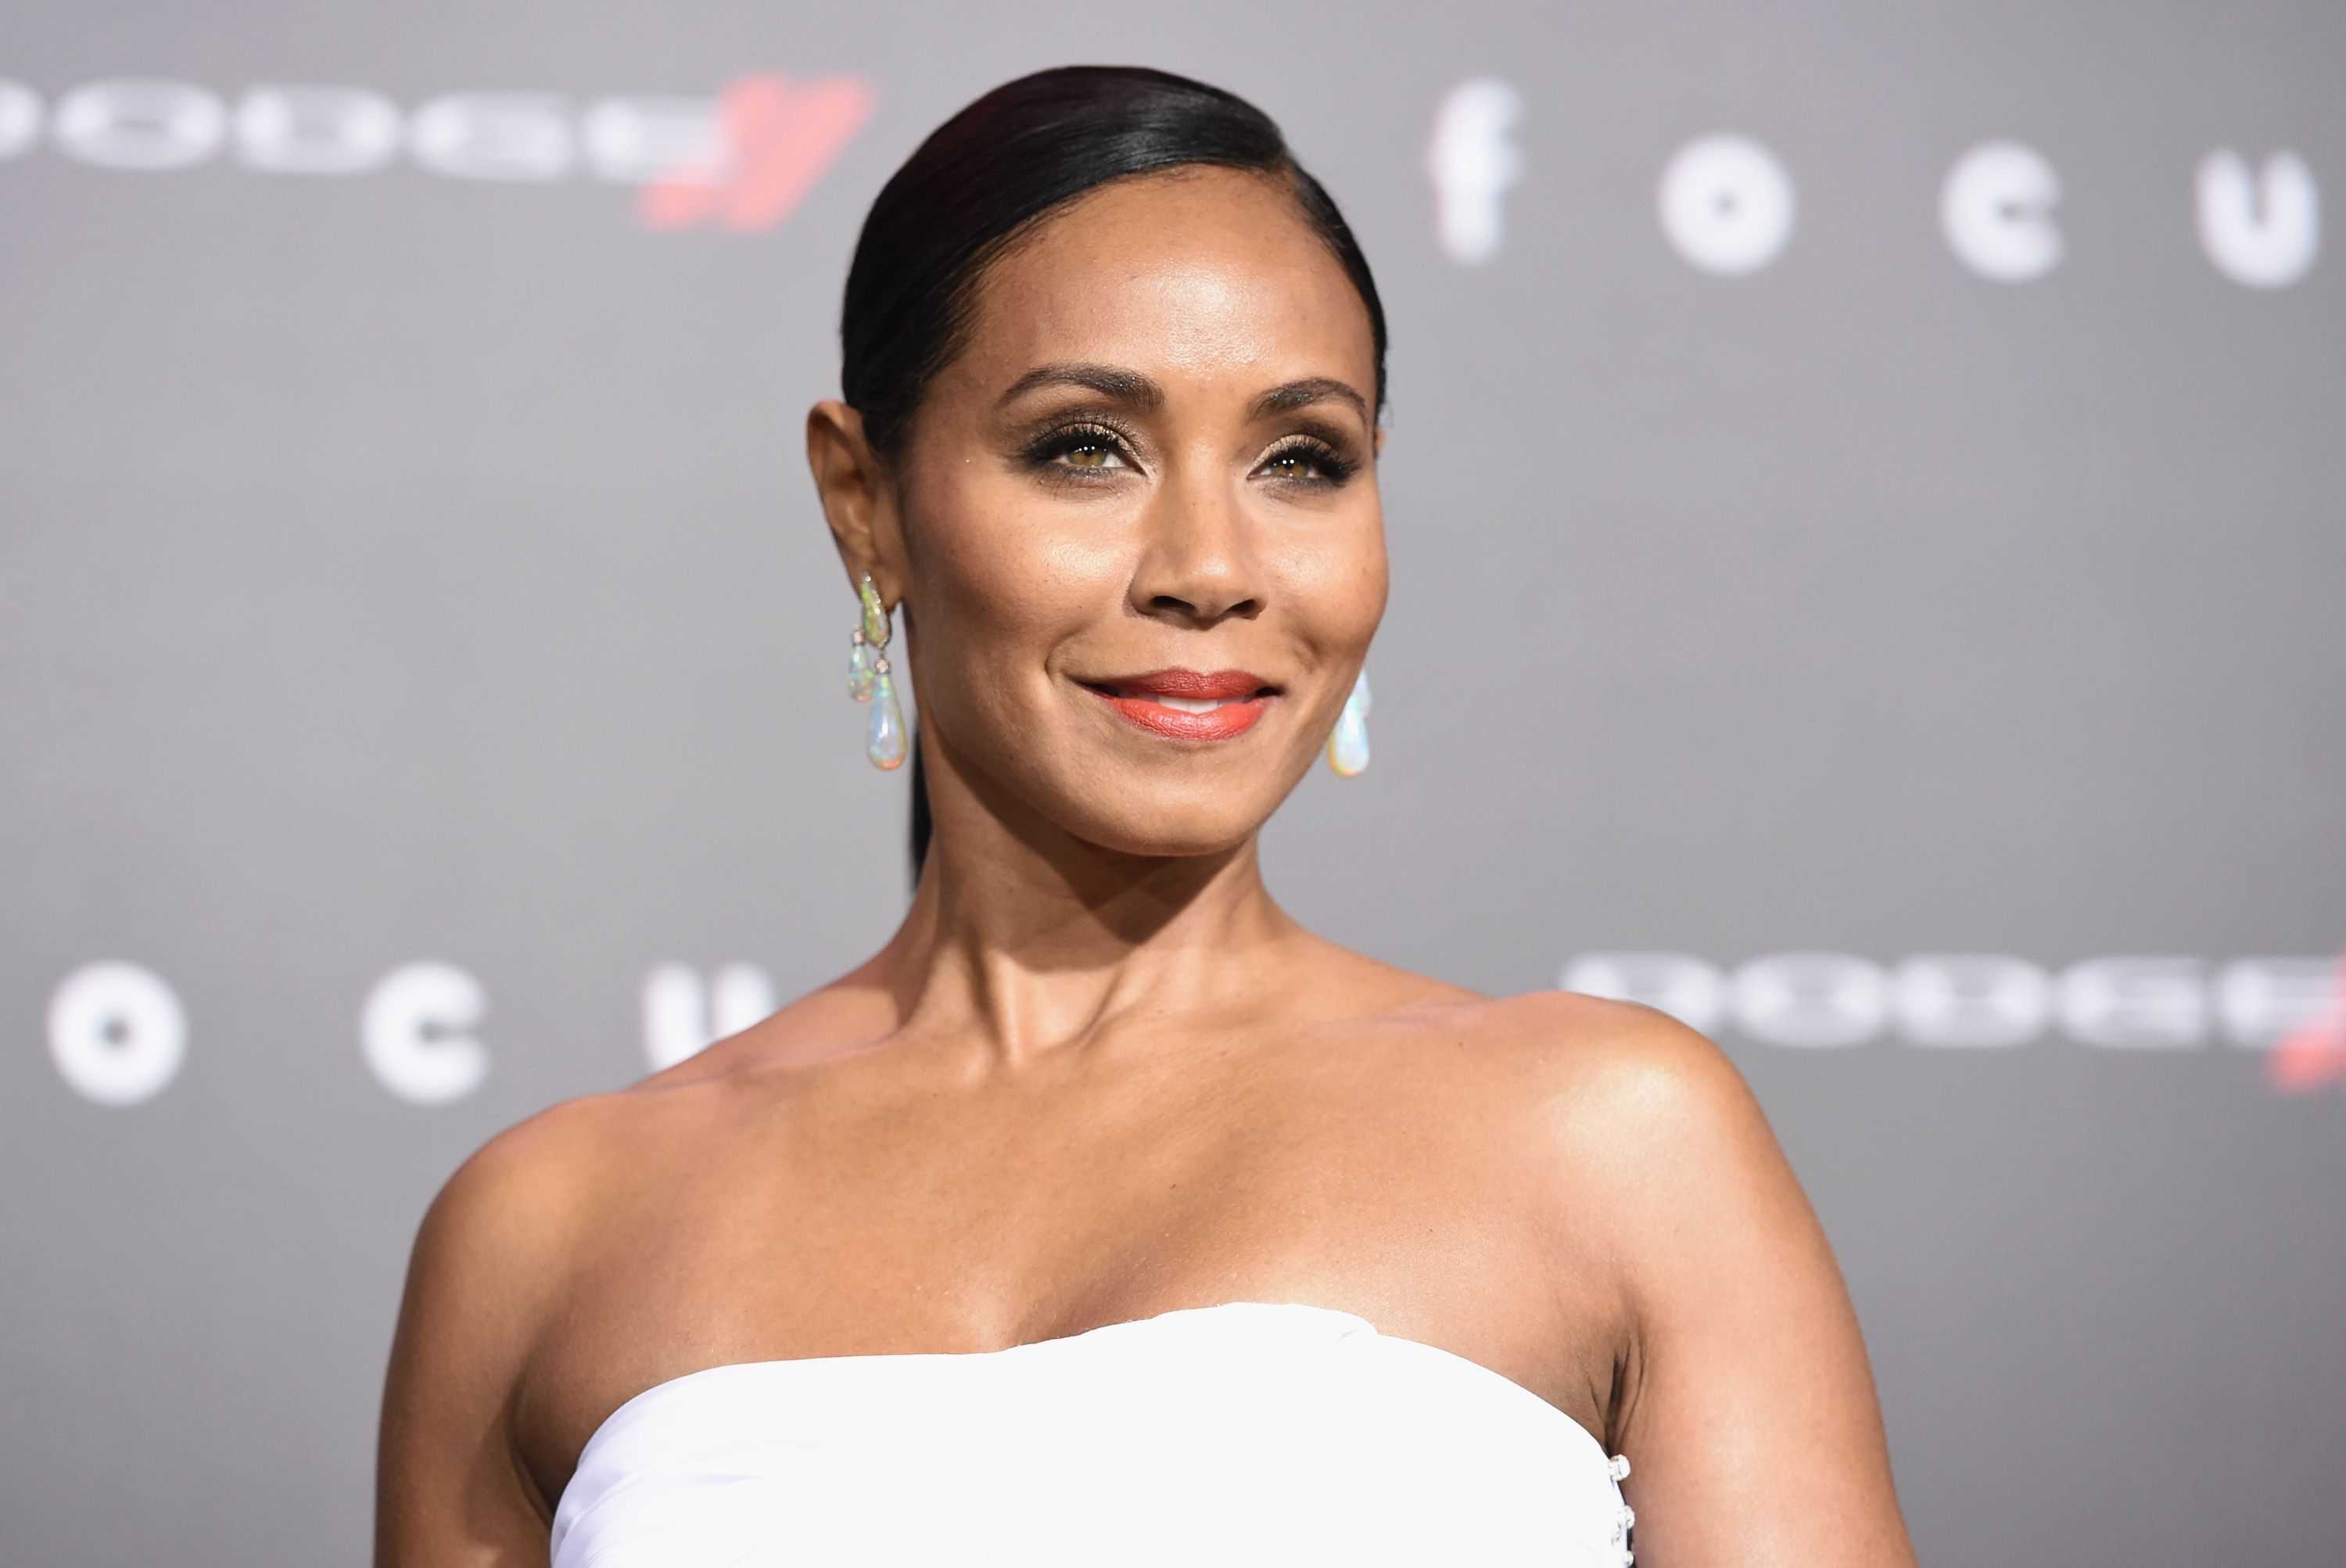 Jada Pinkett Smith on Tupac: 'Our bond was always about survival'